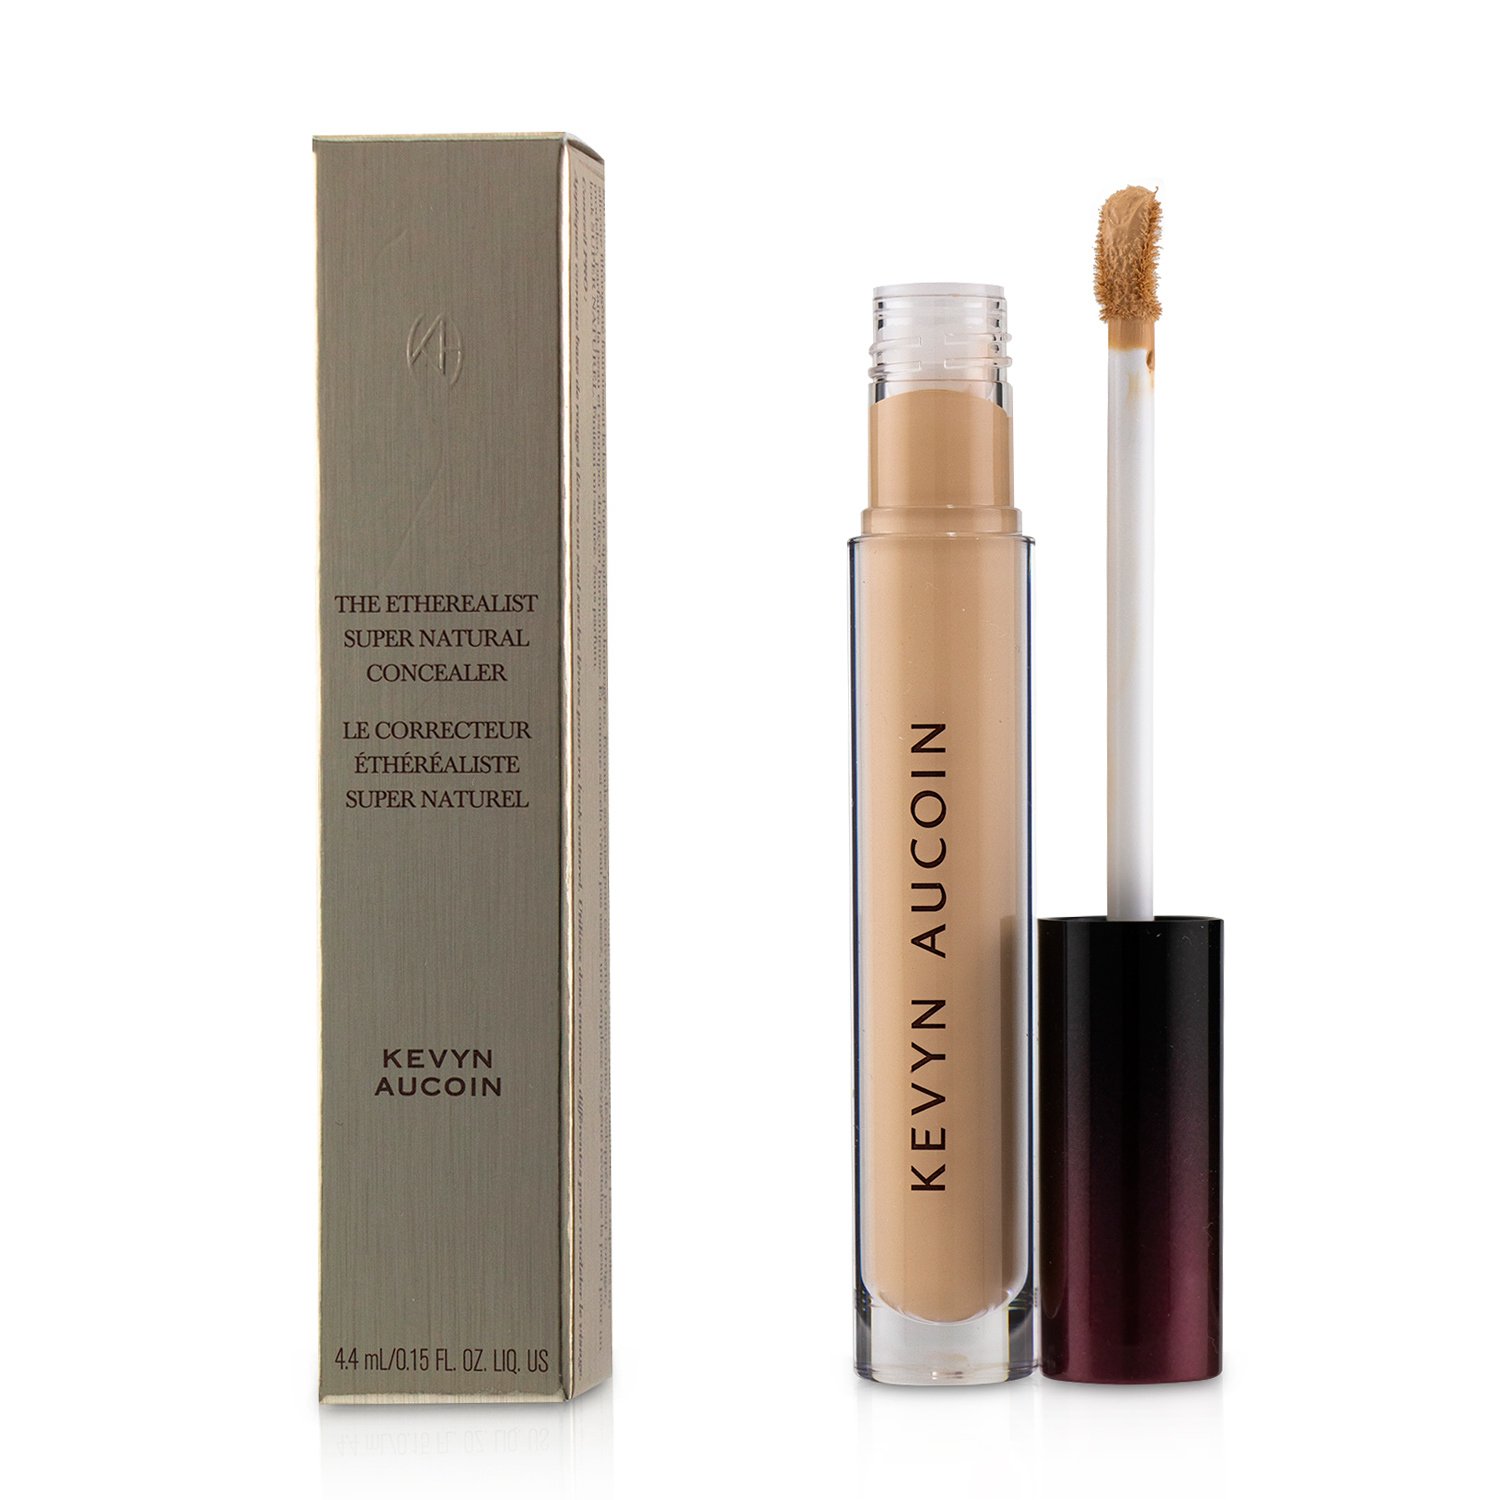 Kevyn Aucoin - 清透脫俗自然遮瑕液 The Etherealist Super Natural Concealer